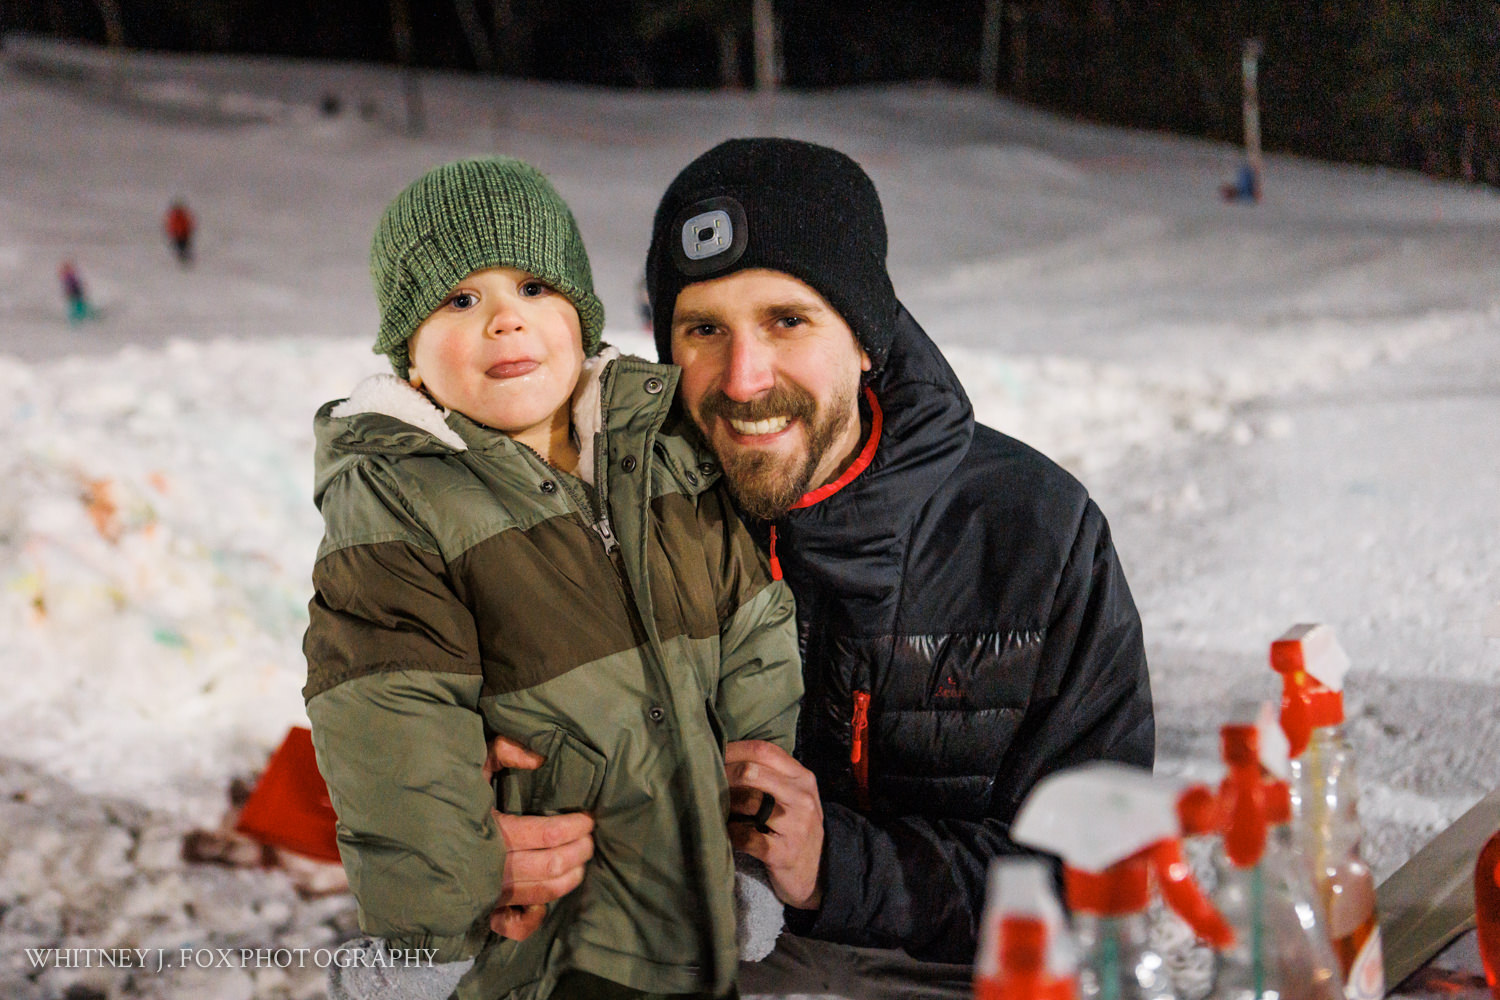 426 winter kids welcome to winter 2022 lost valley auburn maine documentary event photographer whitney j fox 3507 w